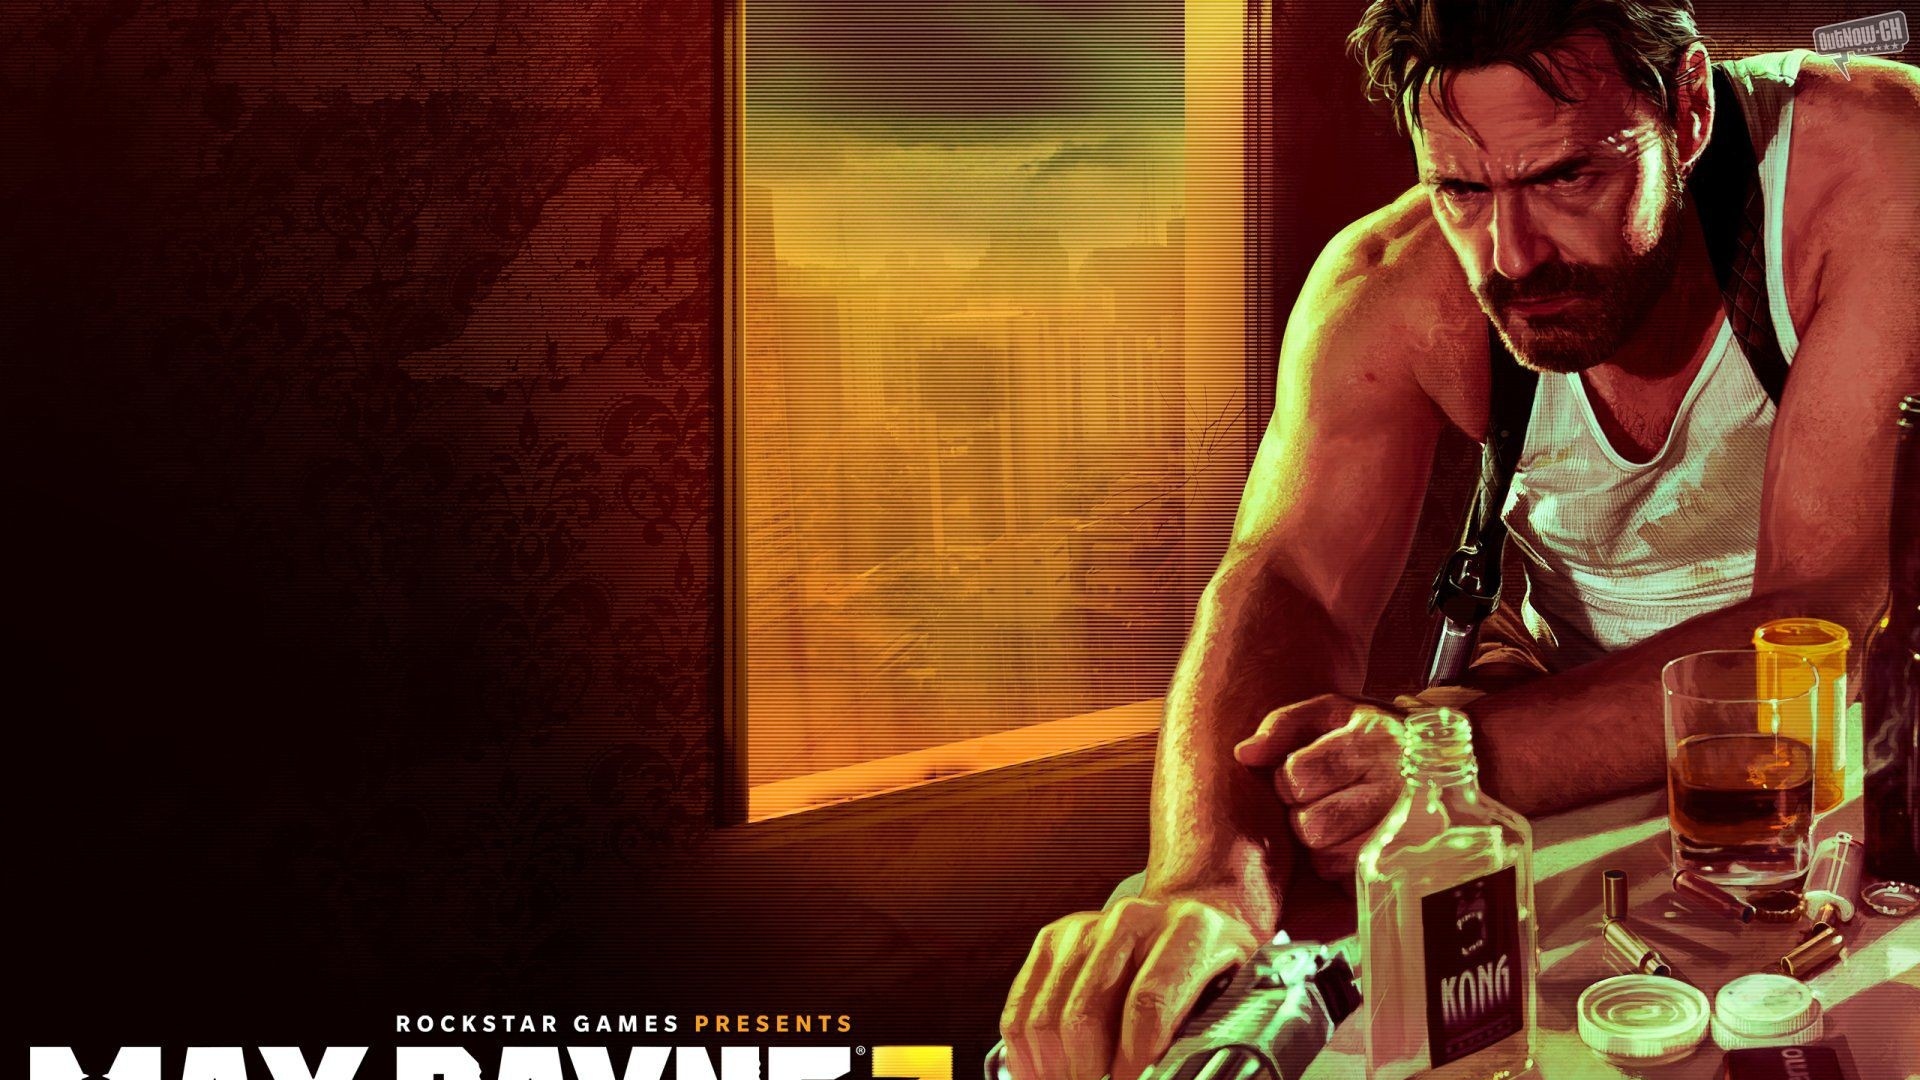 max payne 3 for pc